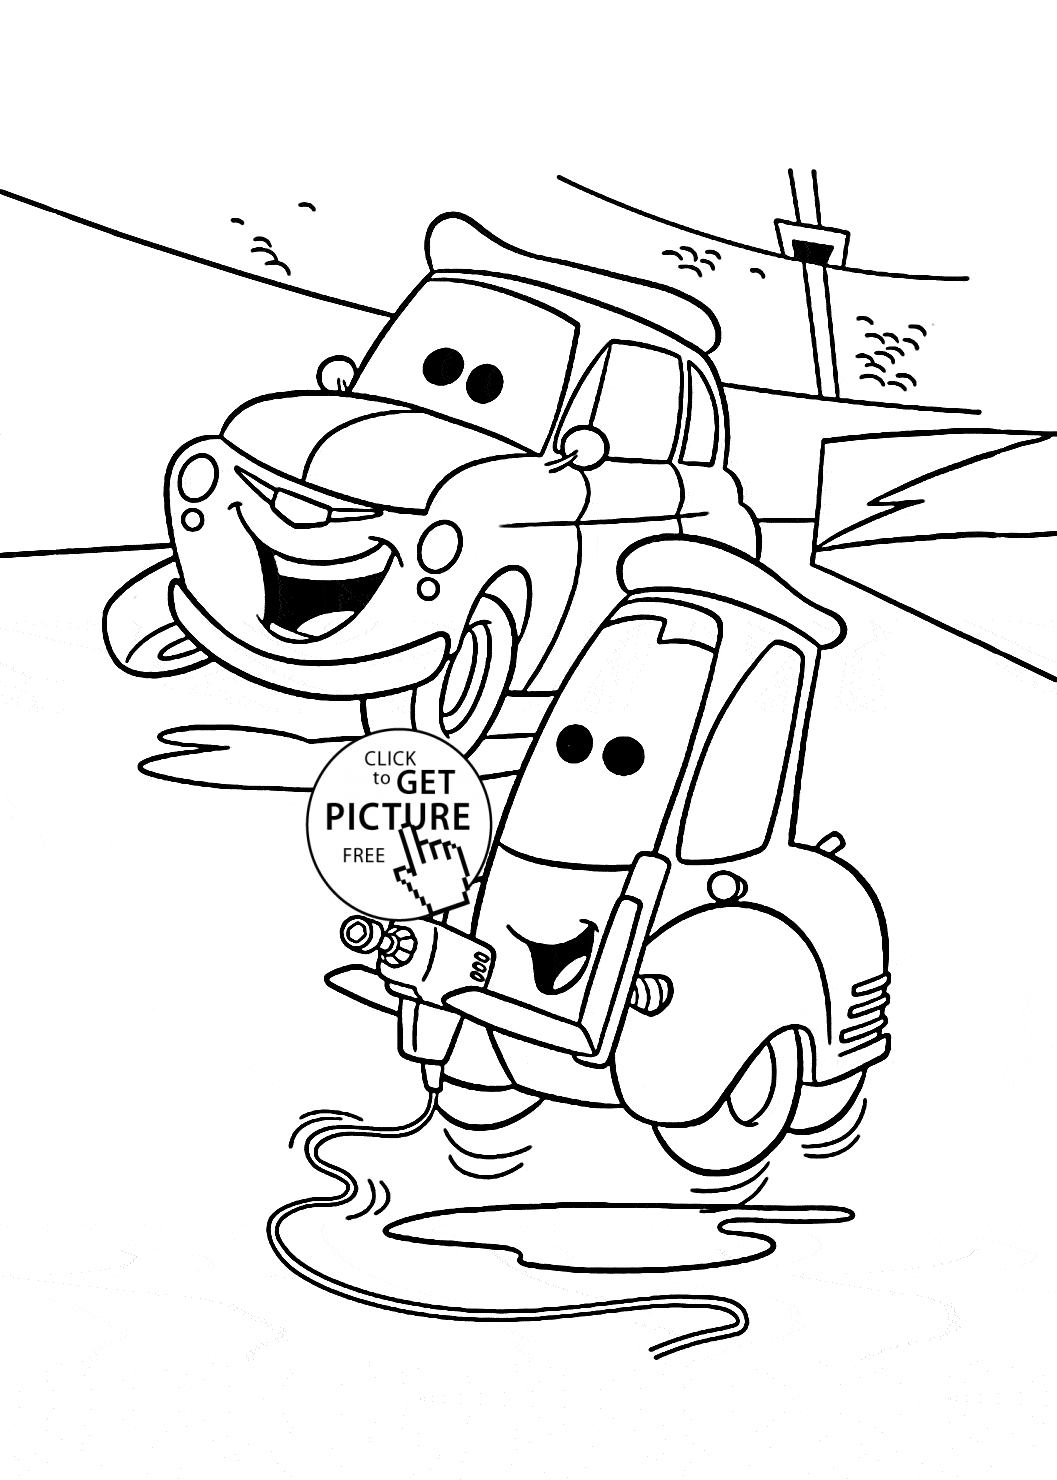 Free Printable Lightning Mcqueen Coloring Pages For Kids Pixar Cars